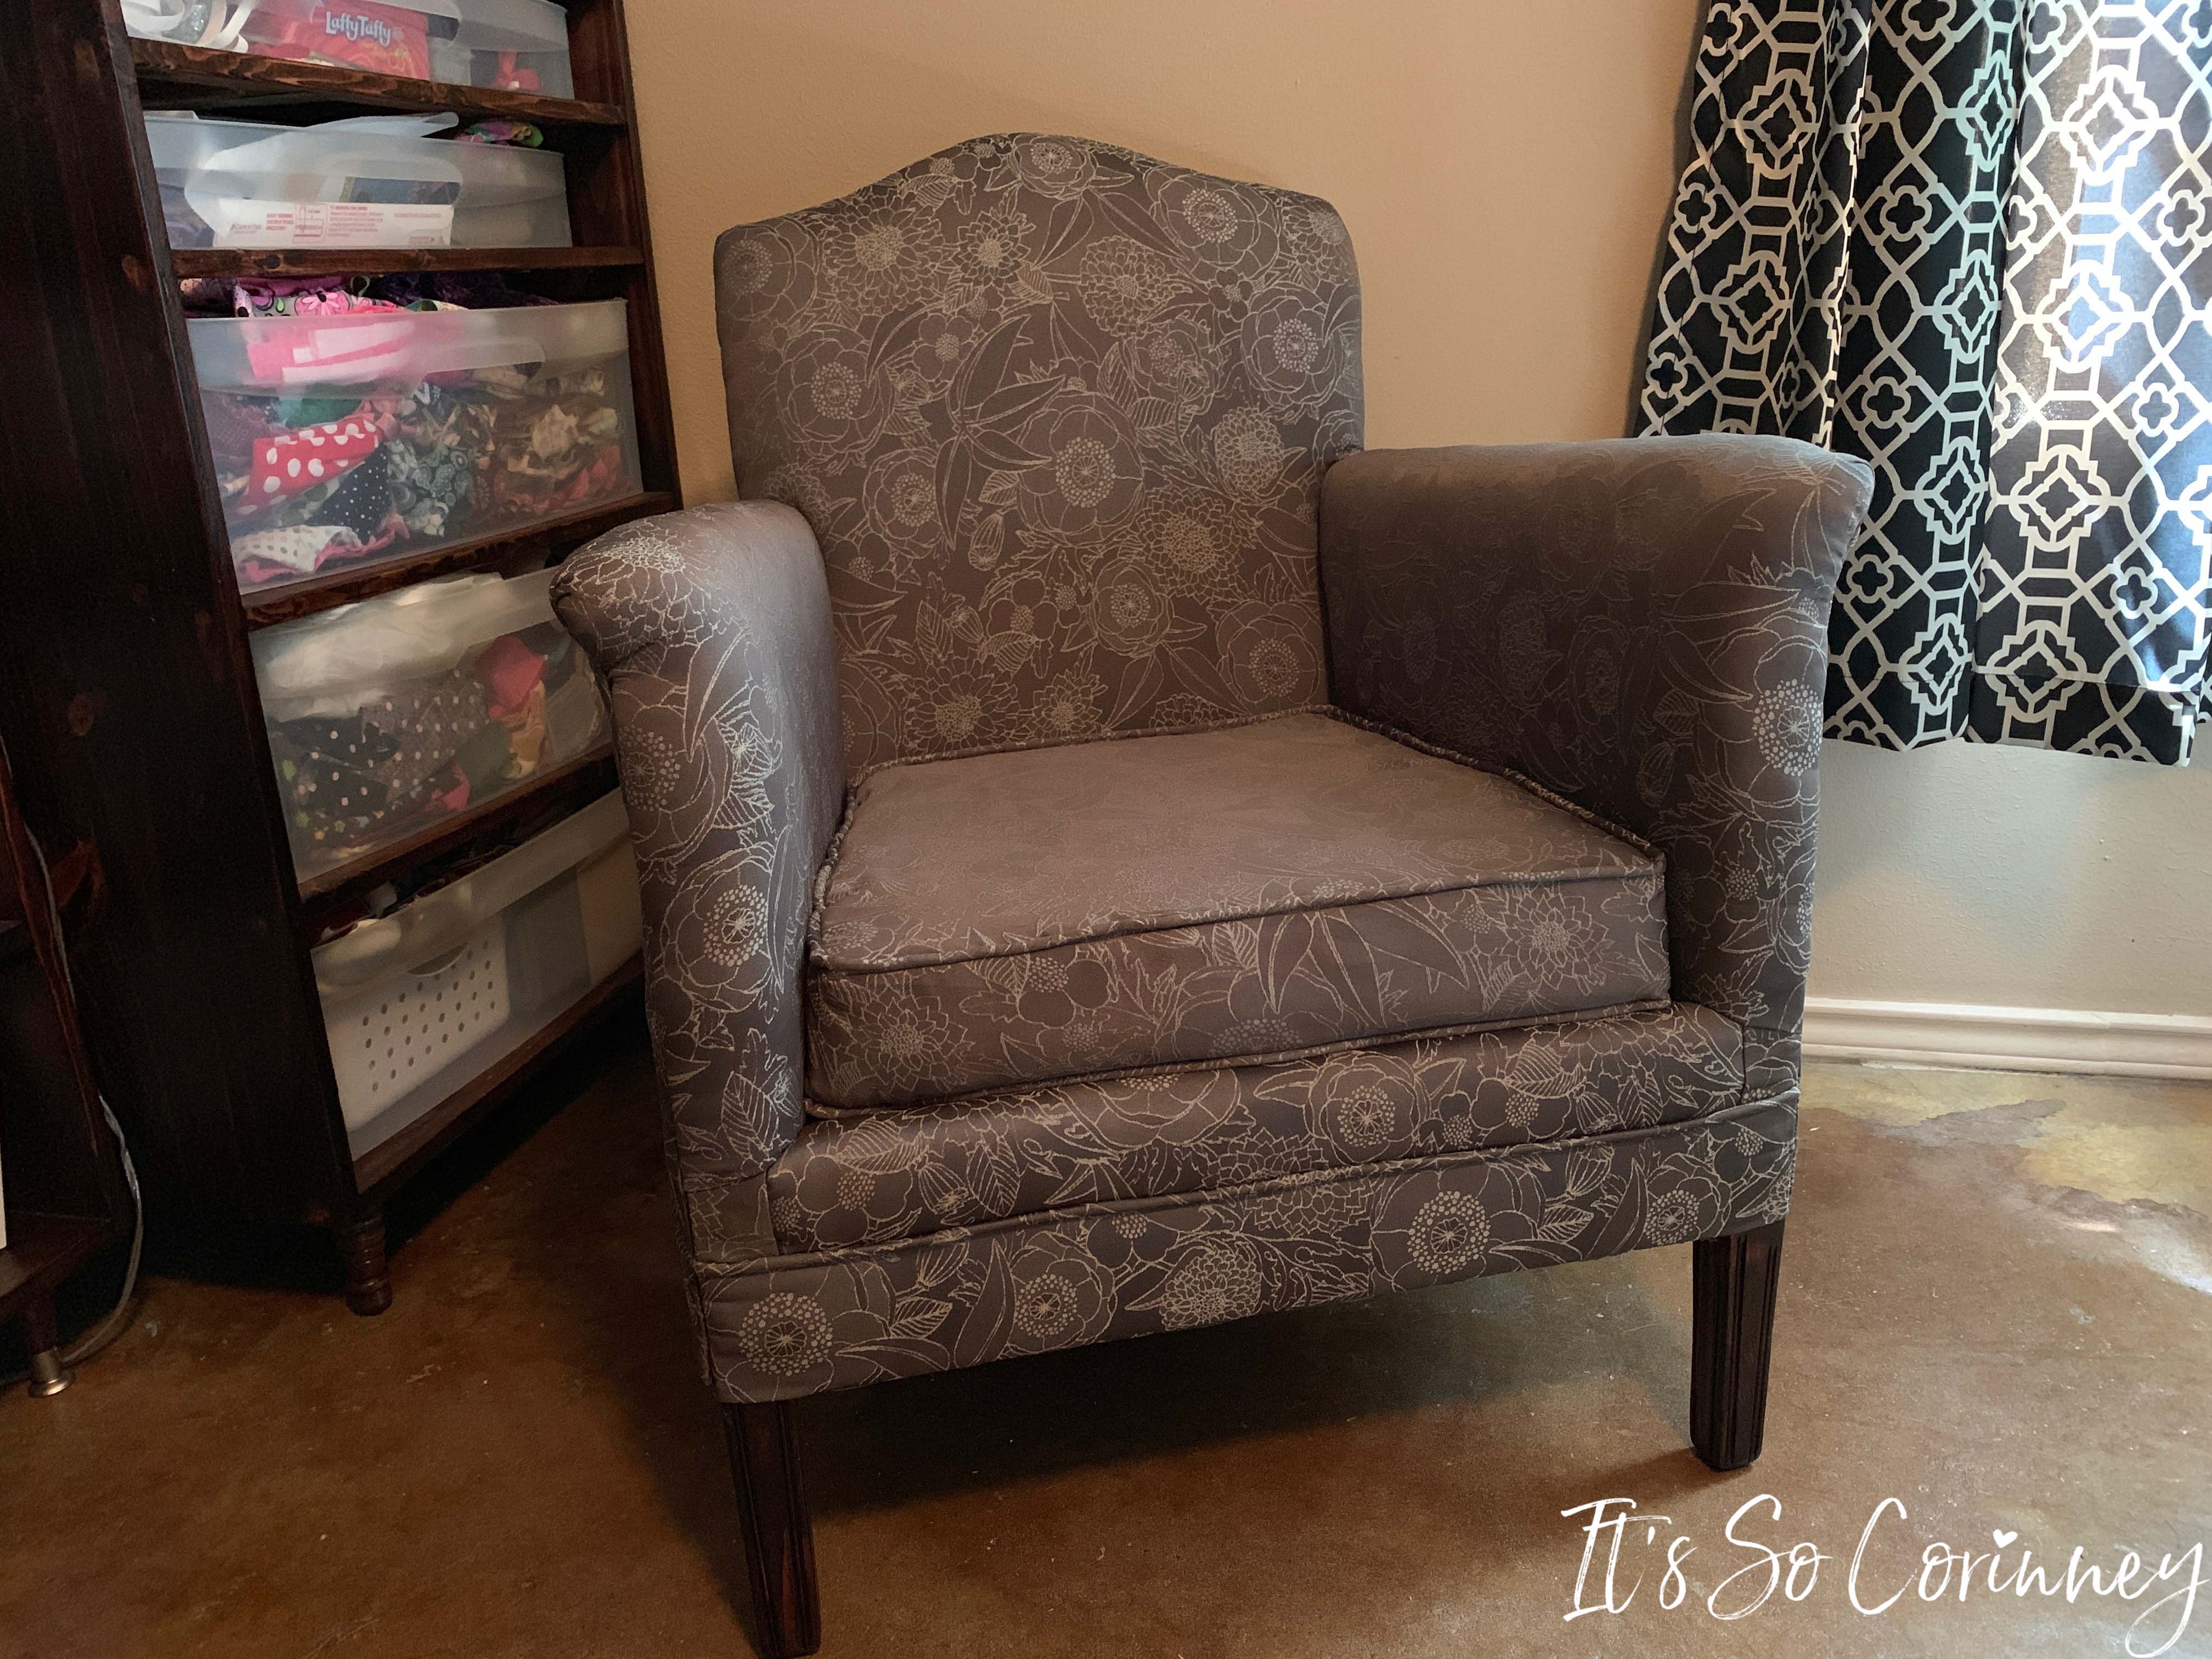 Reupholstered Arm Chair